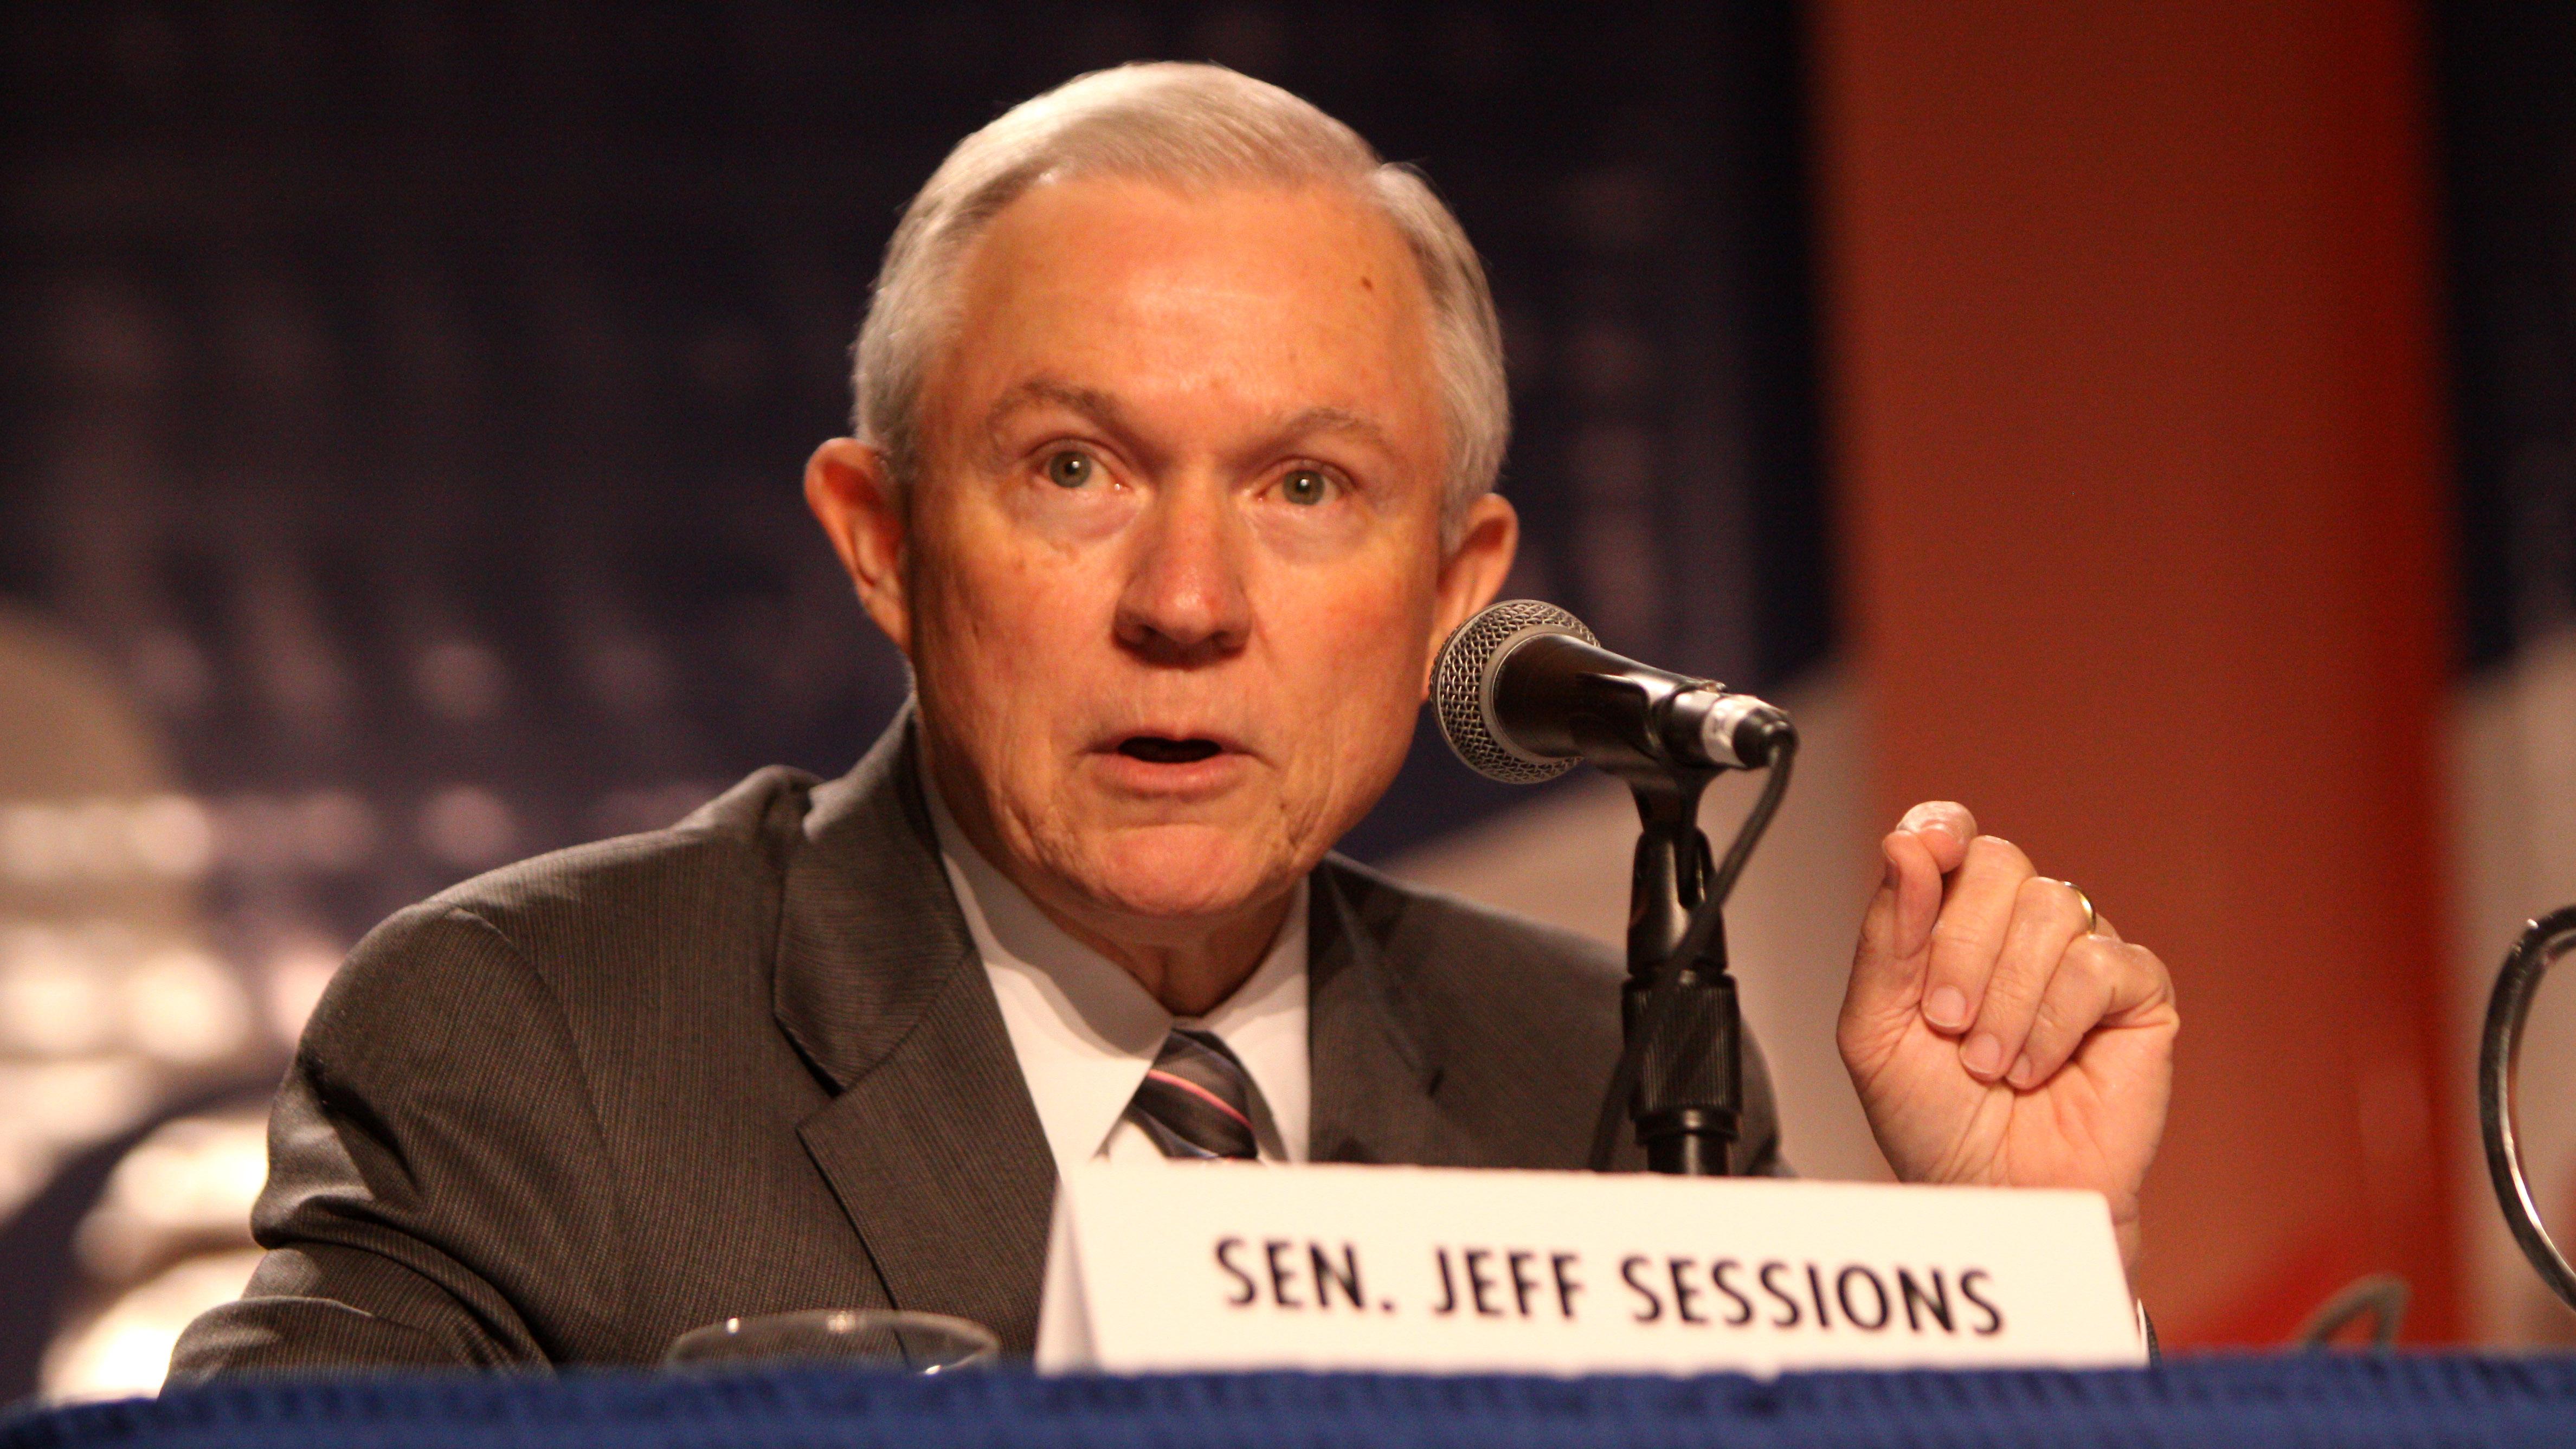 An appeals court denied Attorney General Jeff Sessions' attempt to tie federal grant money to immigration compliance. (Gage Skidmore / Flickr)